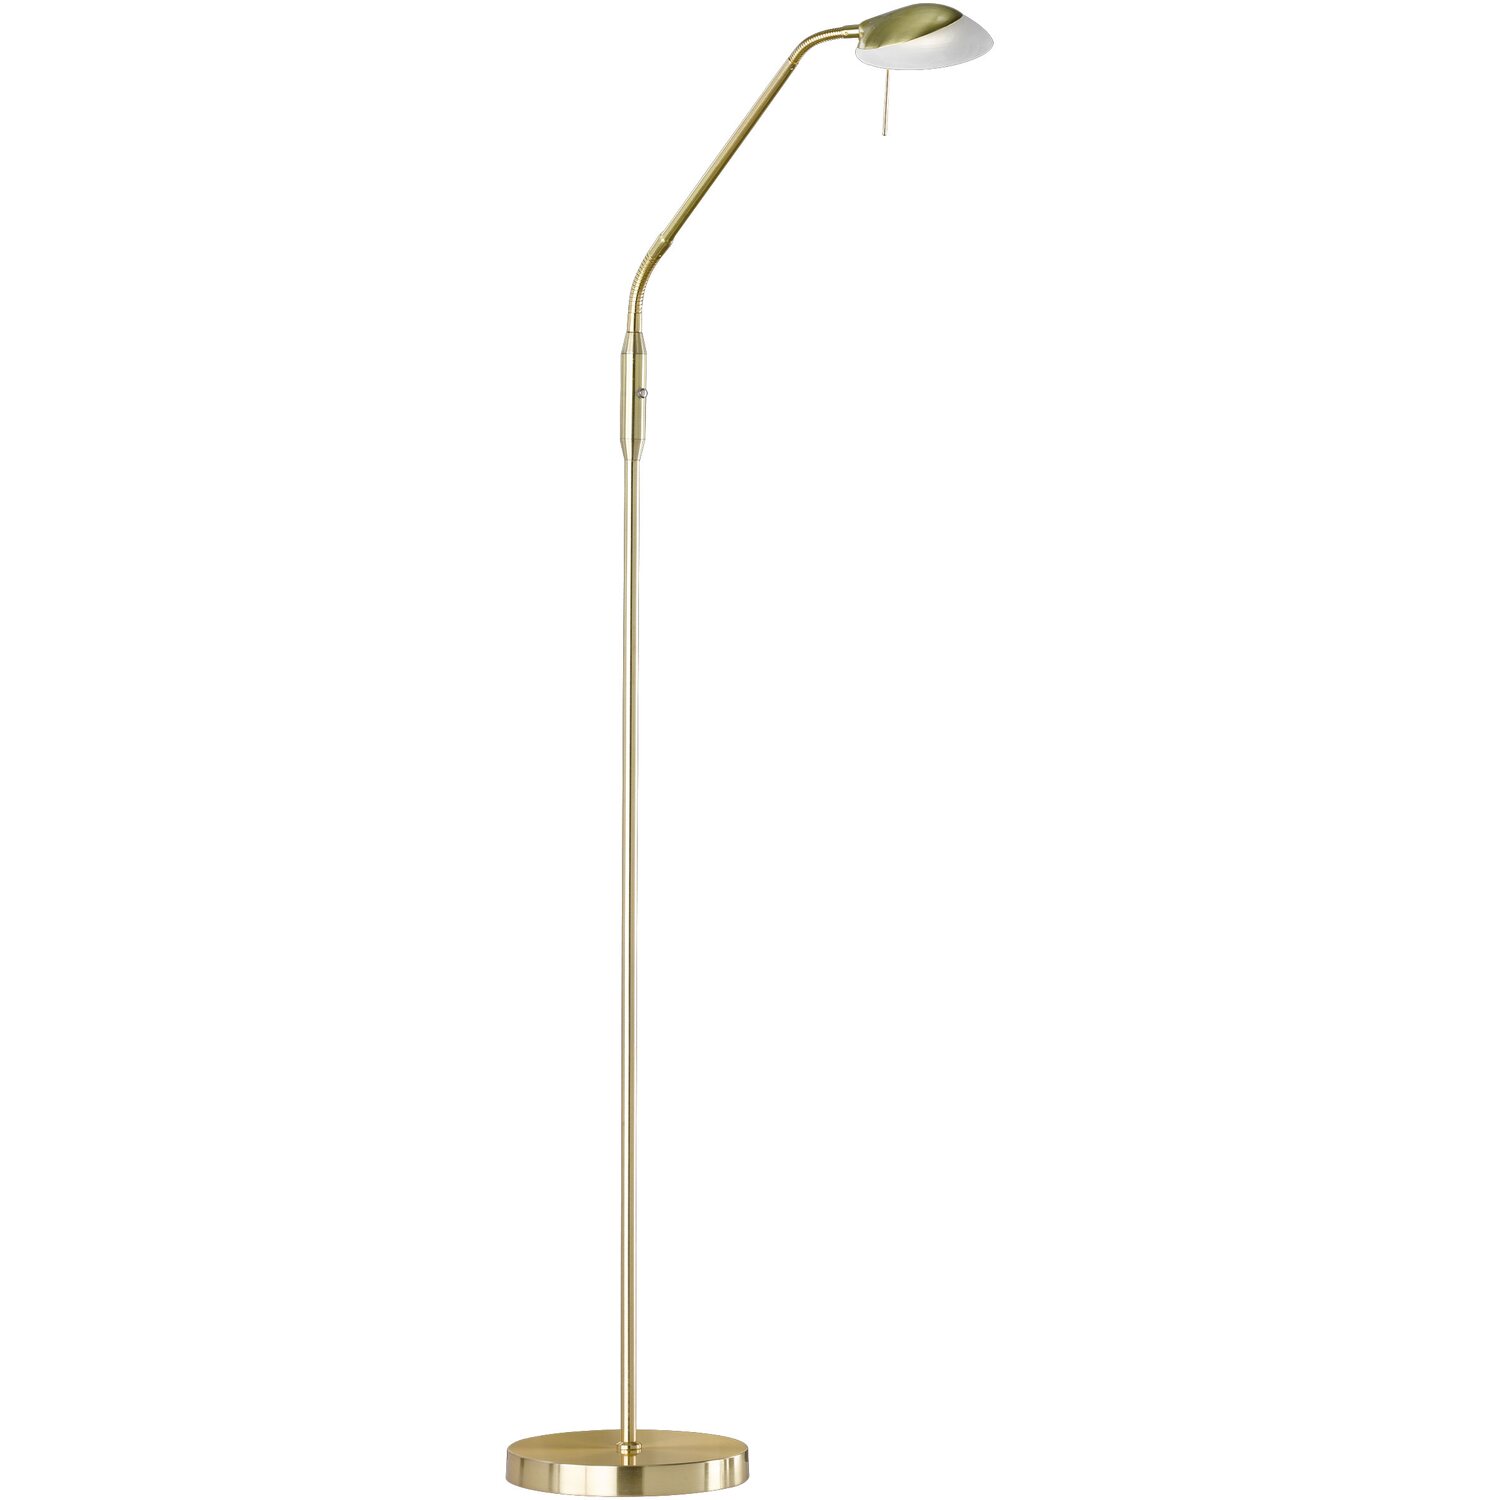 Fischer & Honsel LED-Stehleuchte Pool TW 1x 5 W Gold 530 lm